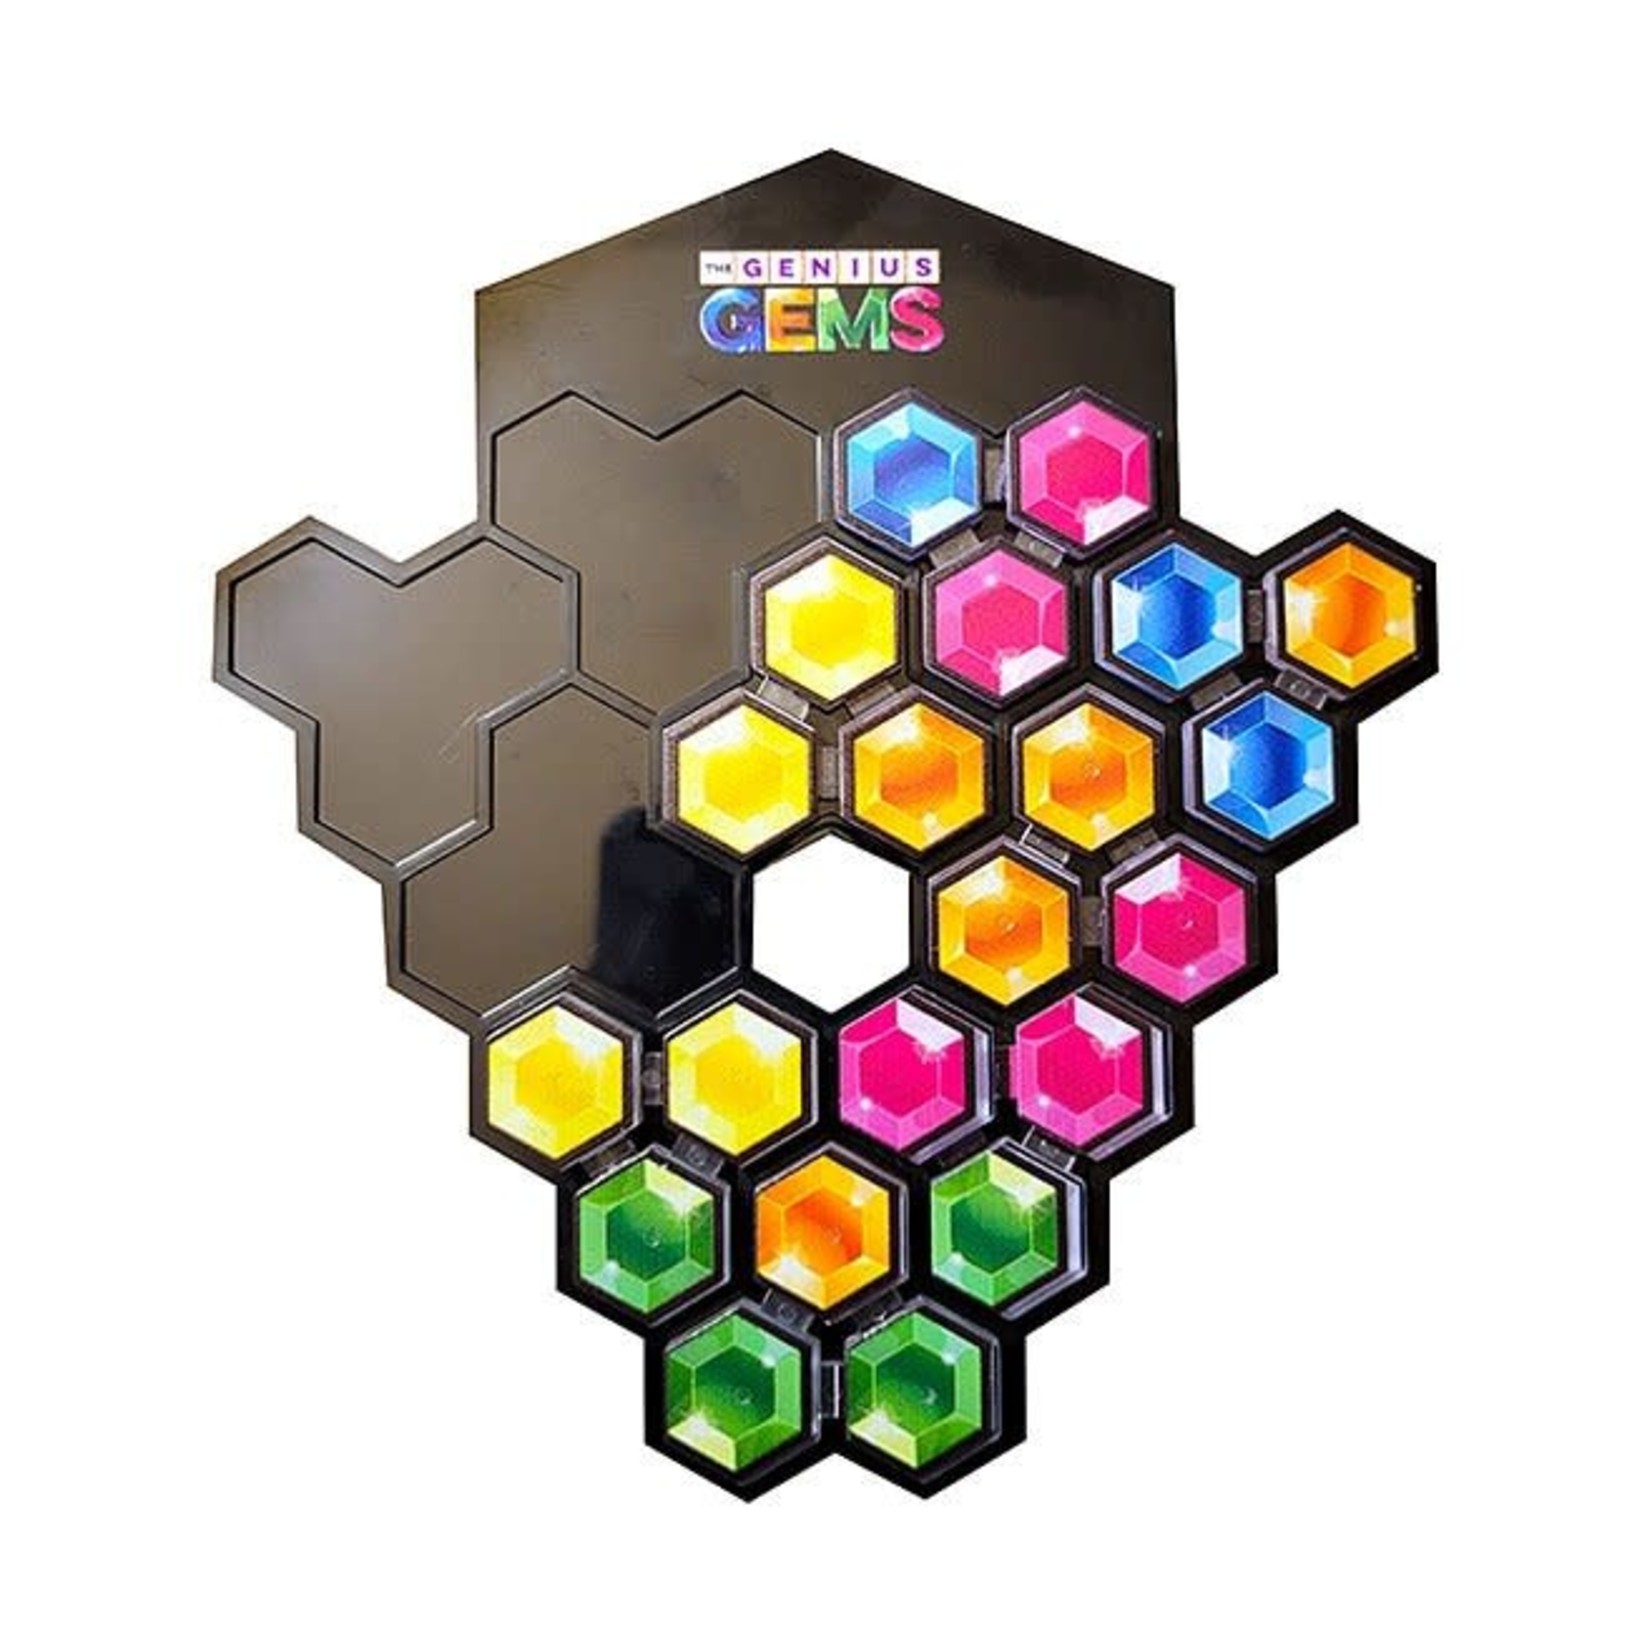 The Happy Puzzle Company Store The Genius Gems Game